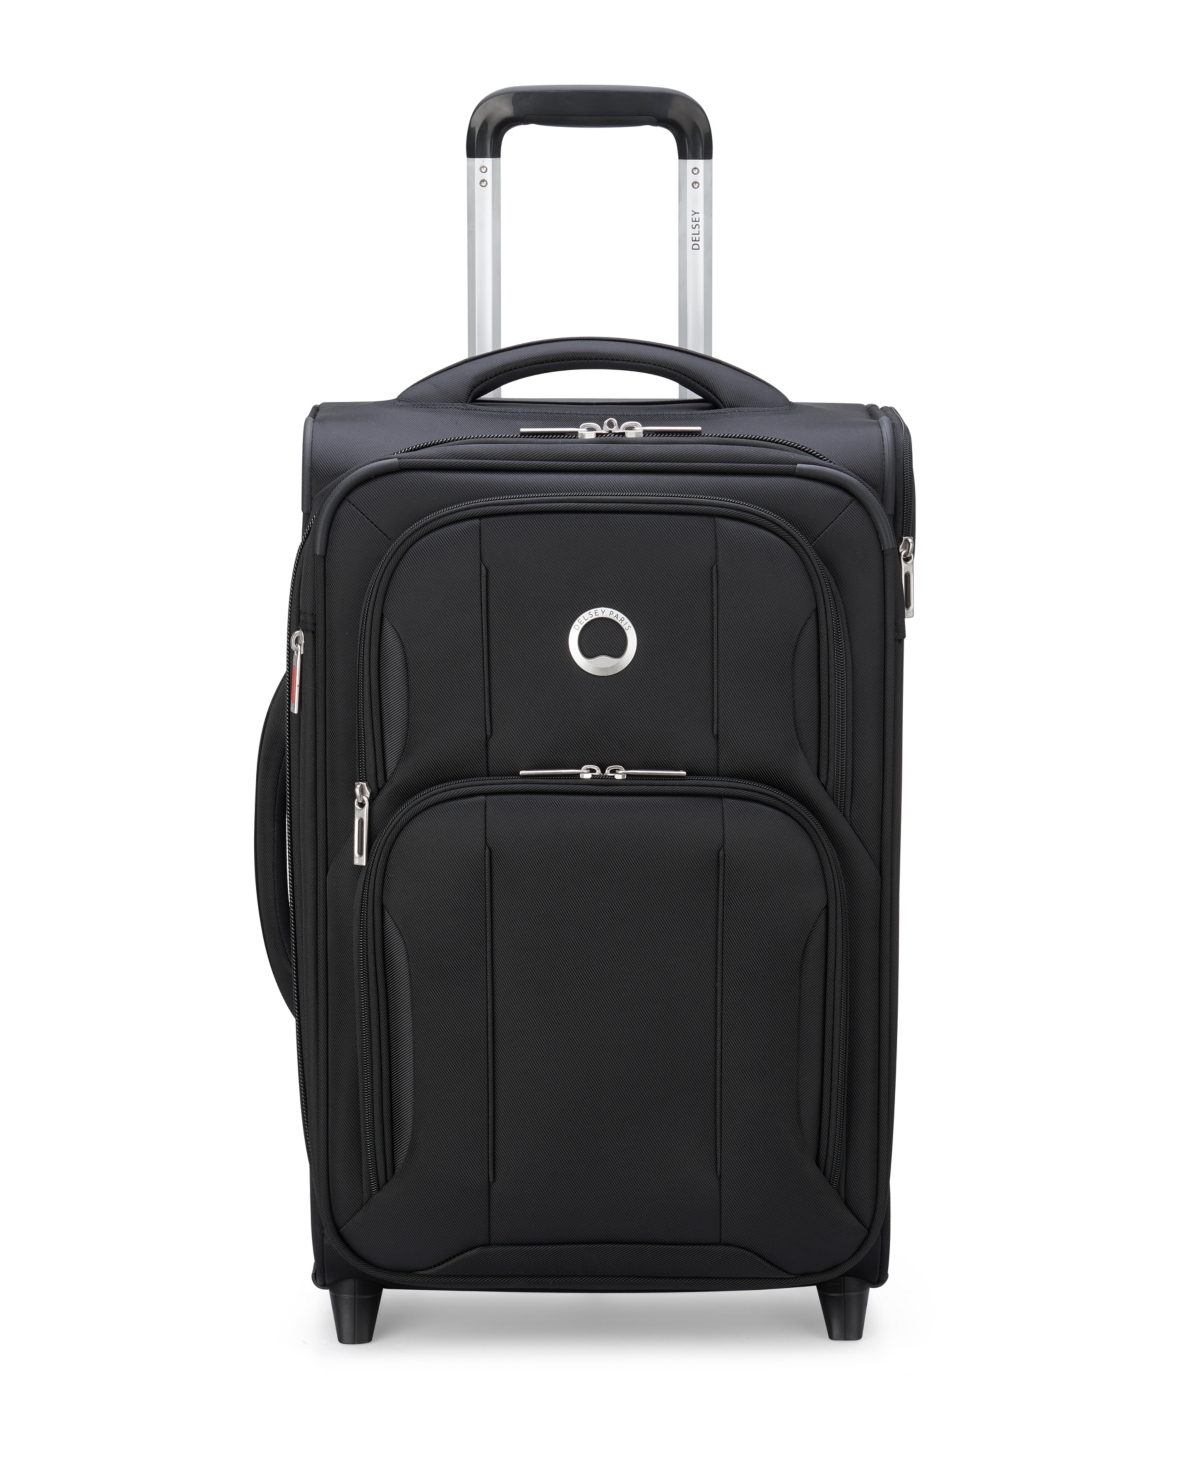 Closeout! Delsey Optimax Lite 2.0 Expandable 2-Wheel Carry-on Upright - Black